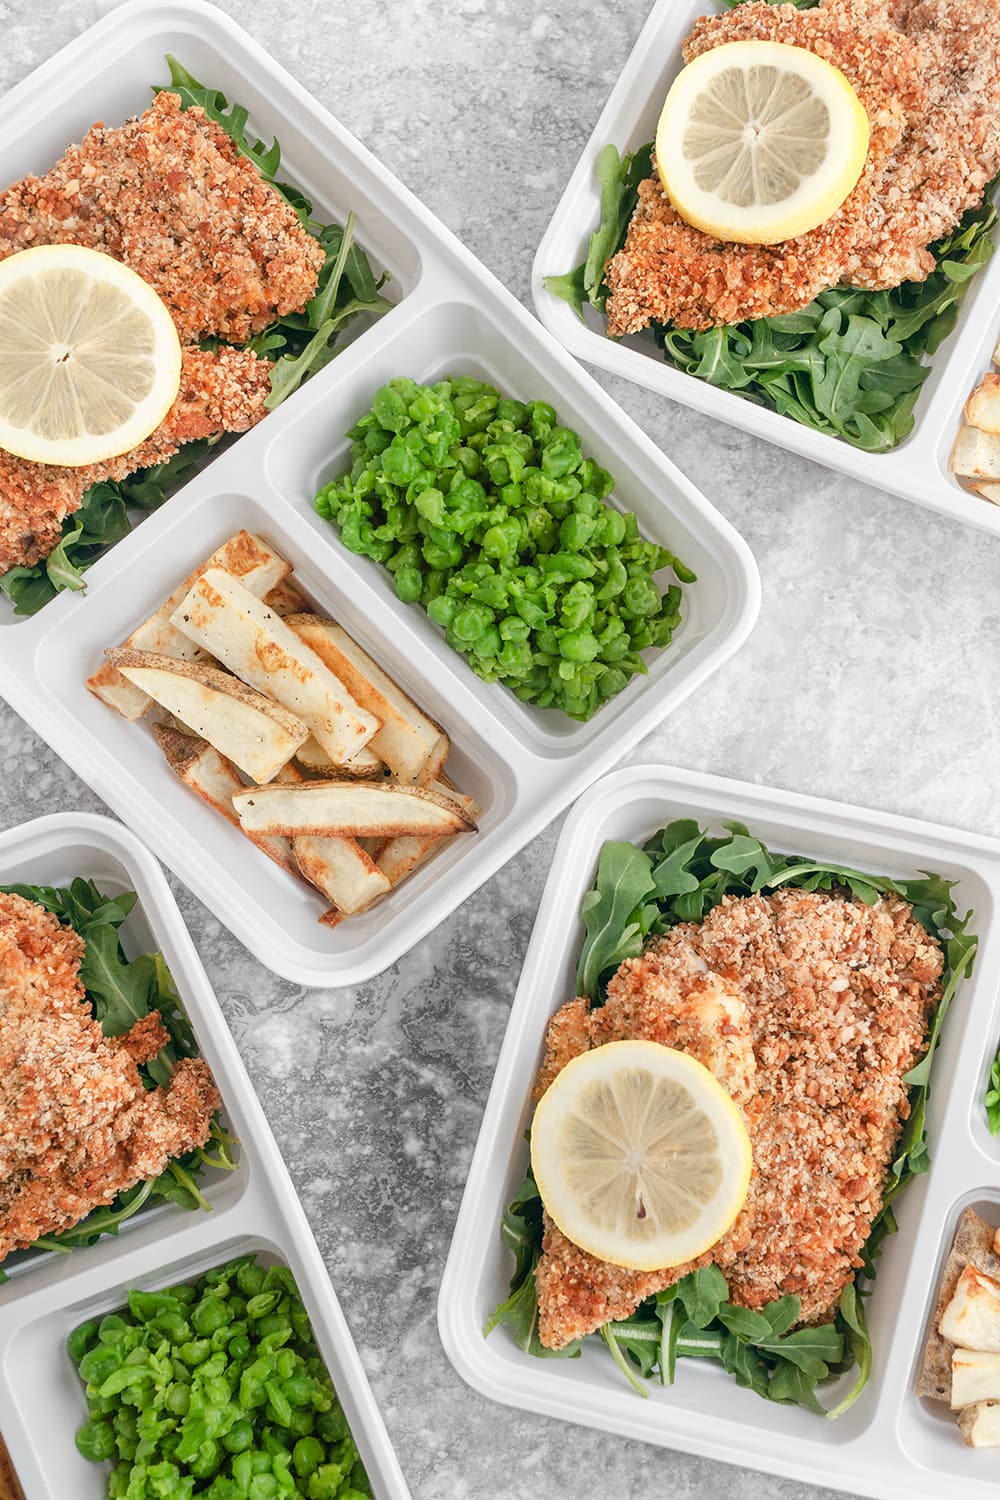 Baked Fish and Chips Meal Prep